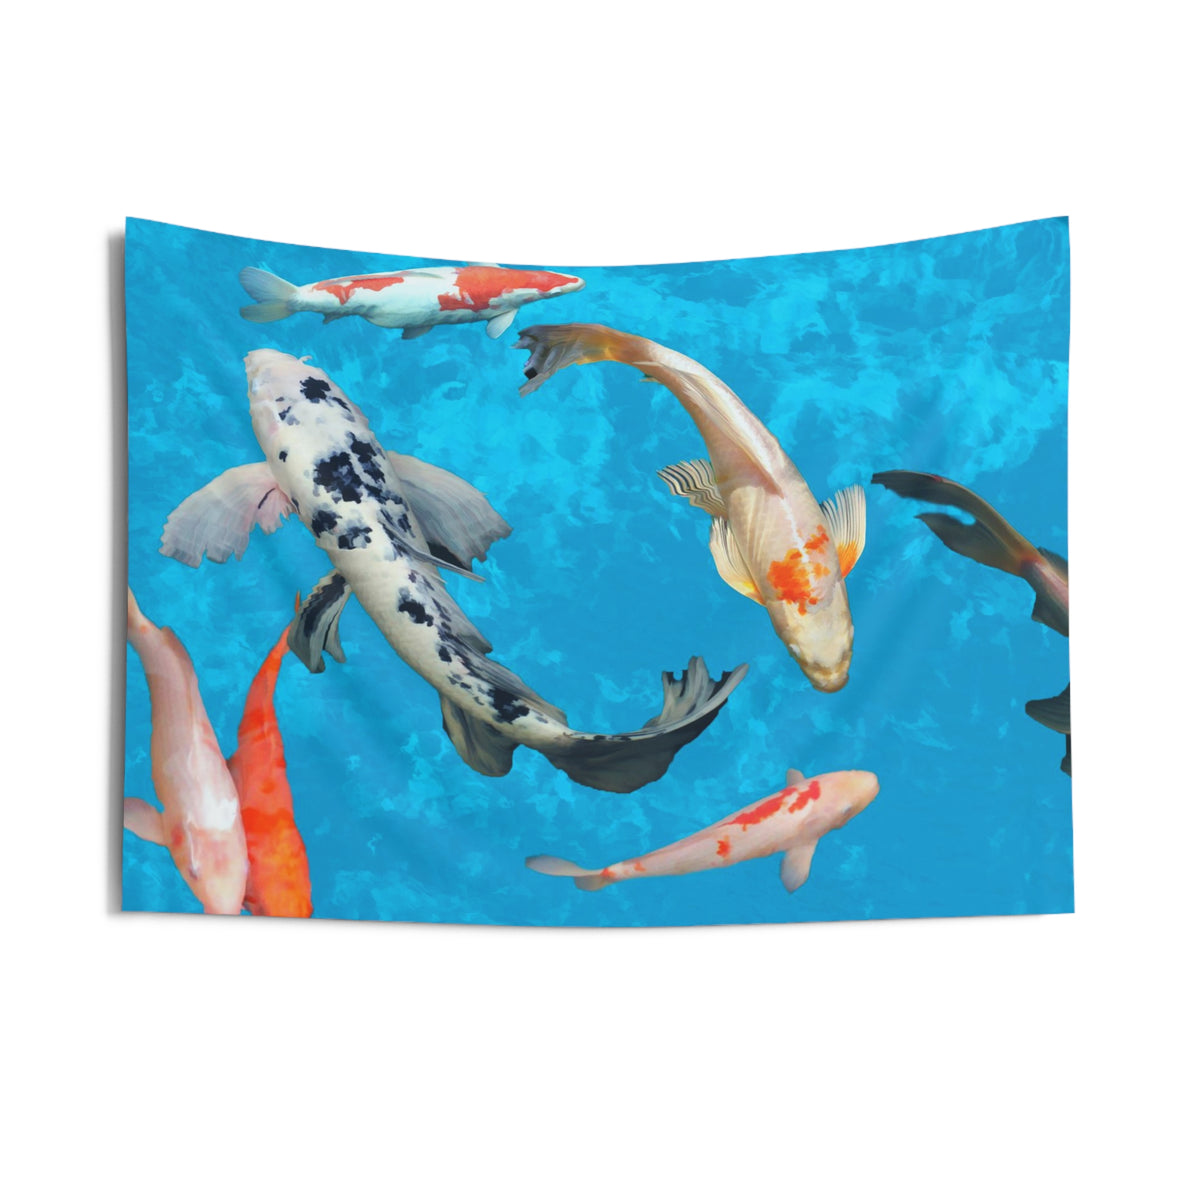 Group of Fishes Tapestry